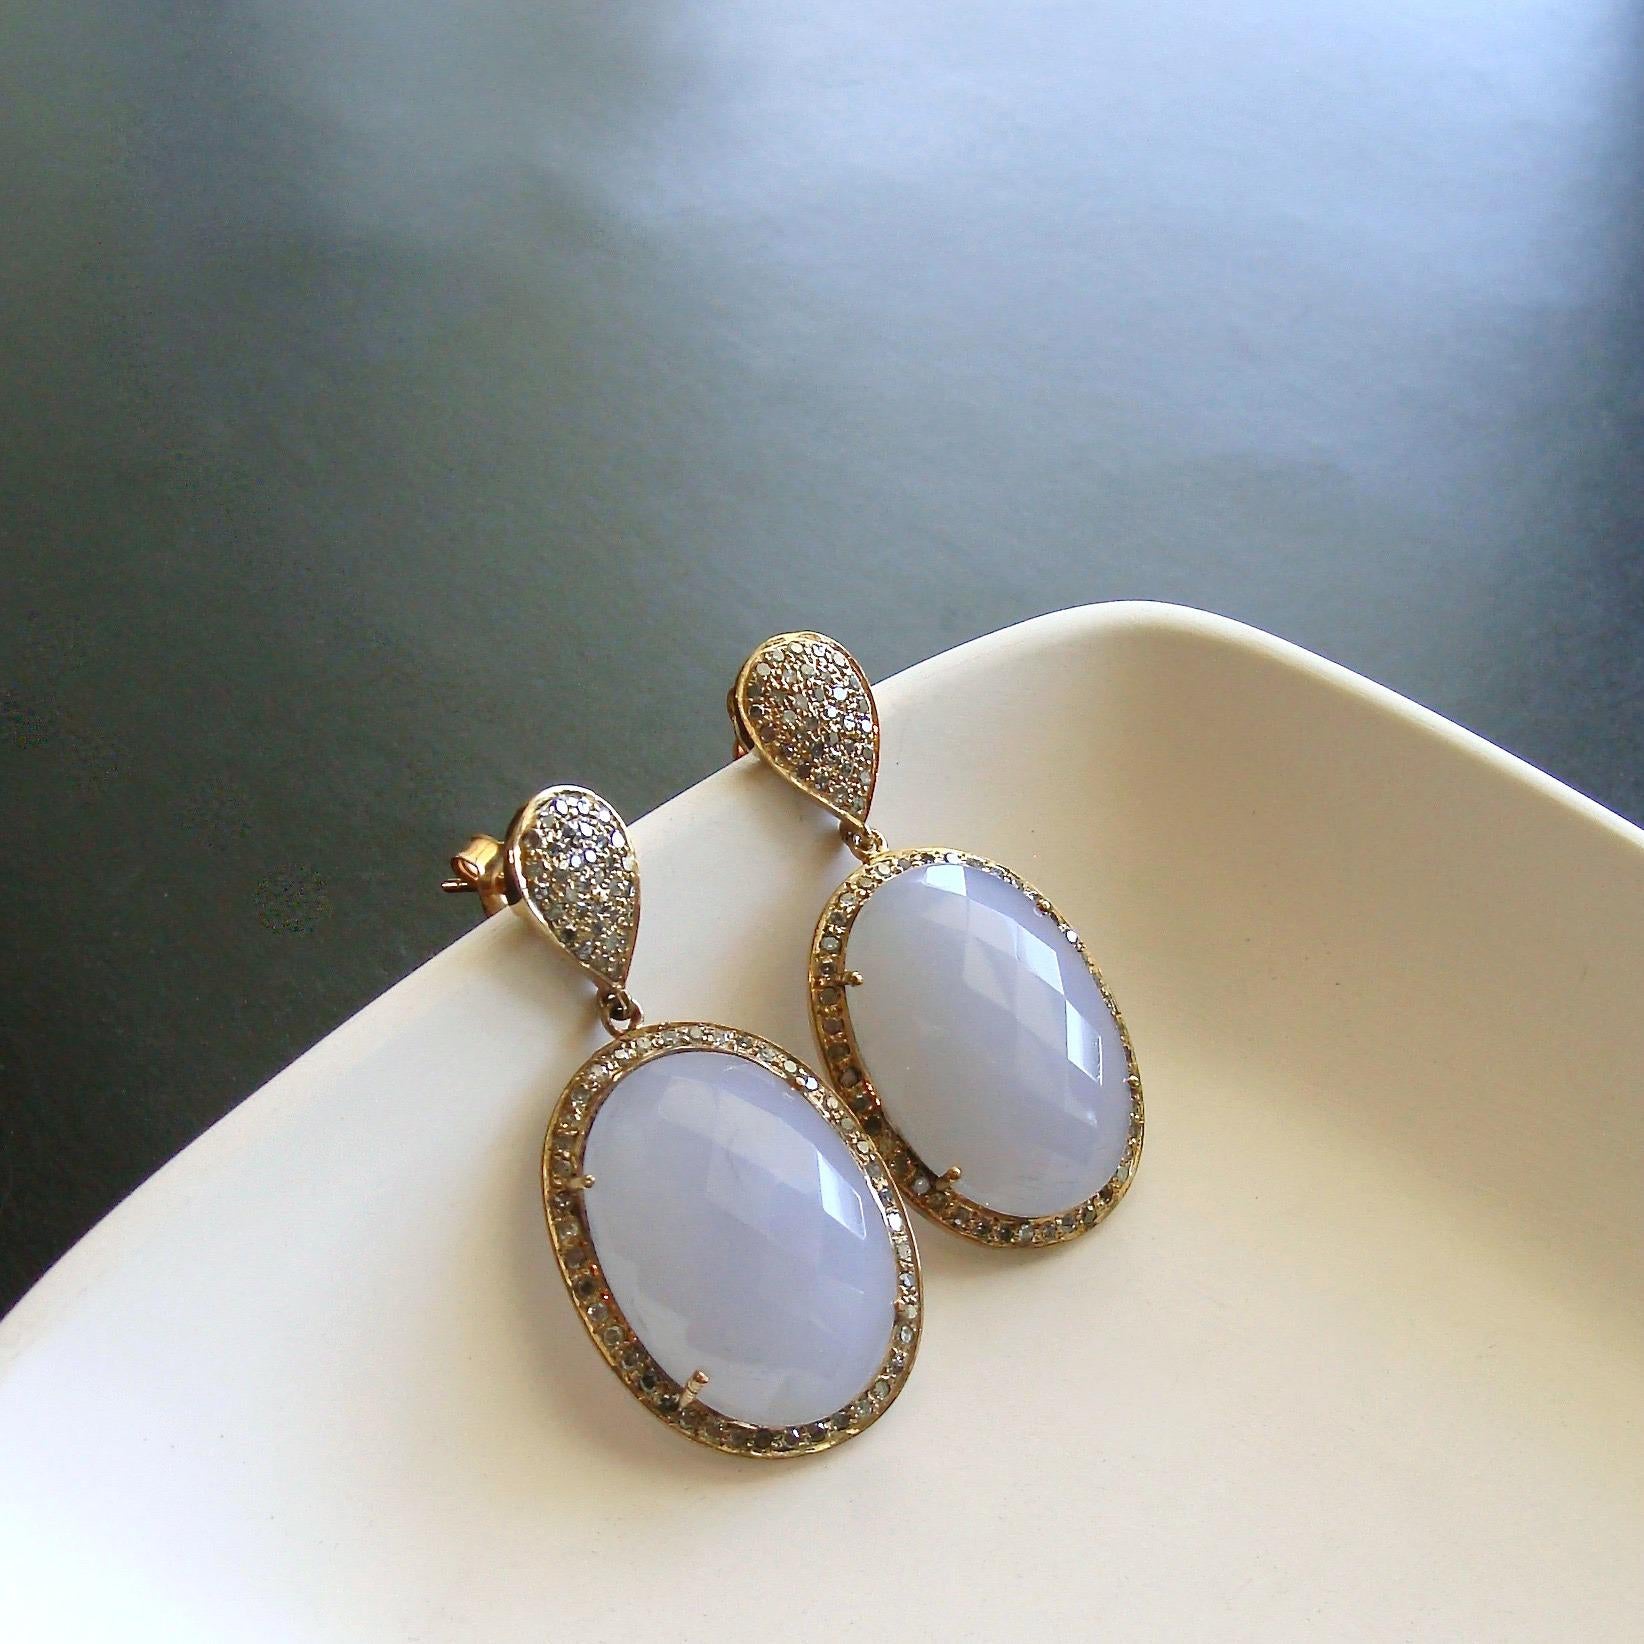 Artisan Pave Champagne Diamonds and Holly Blue Chalcedony Earrings, Payton Earrings